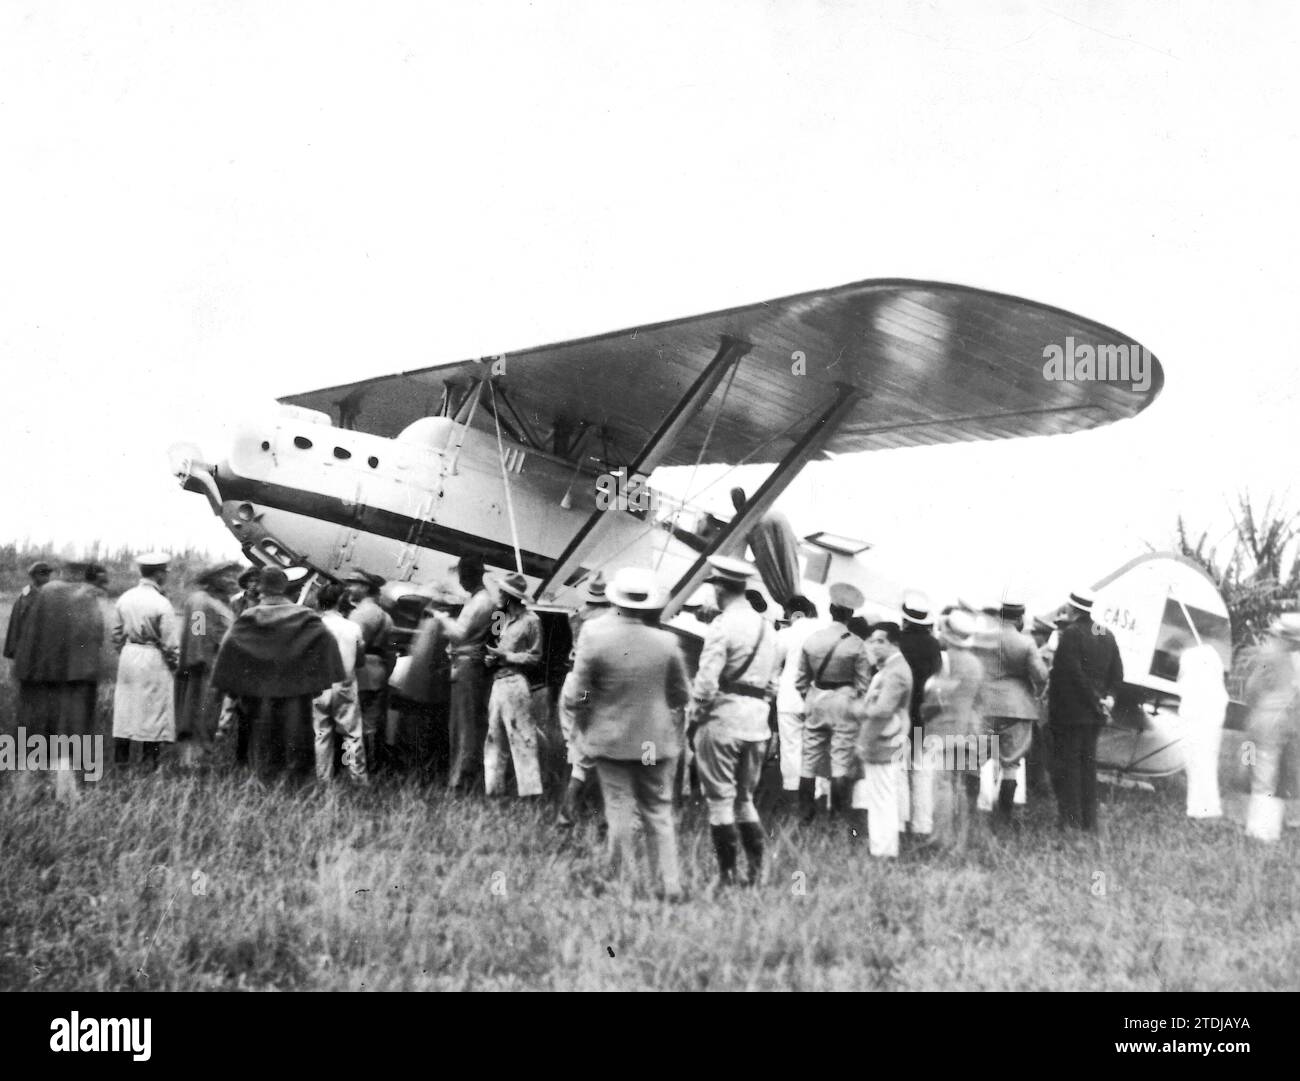 Camagüey (Cuba), 6/11/1933. The aviators Barberán and Collar upon their arrival in Cuba, from where they continued their trip that should have taken them to Mexico, but which unfortunately ended with the disappearance of the aviators and their plane: the 'Four Winds'. Credit: Album / Archivo ABC / Vidal Stock Photo